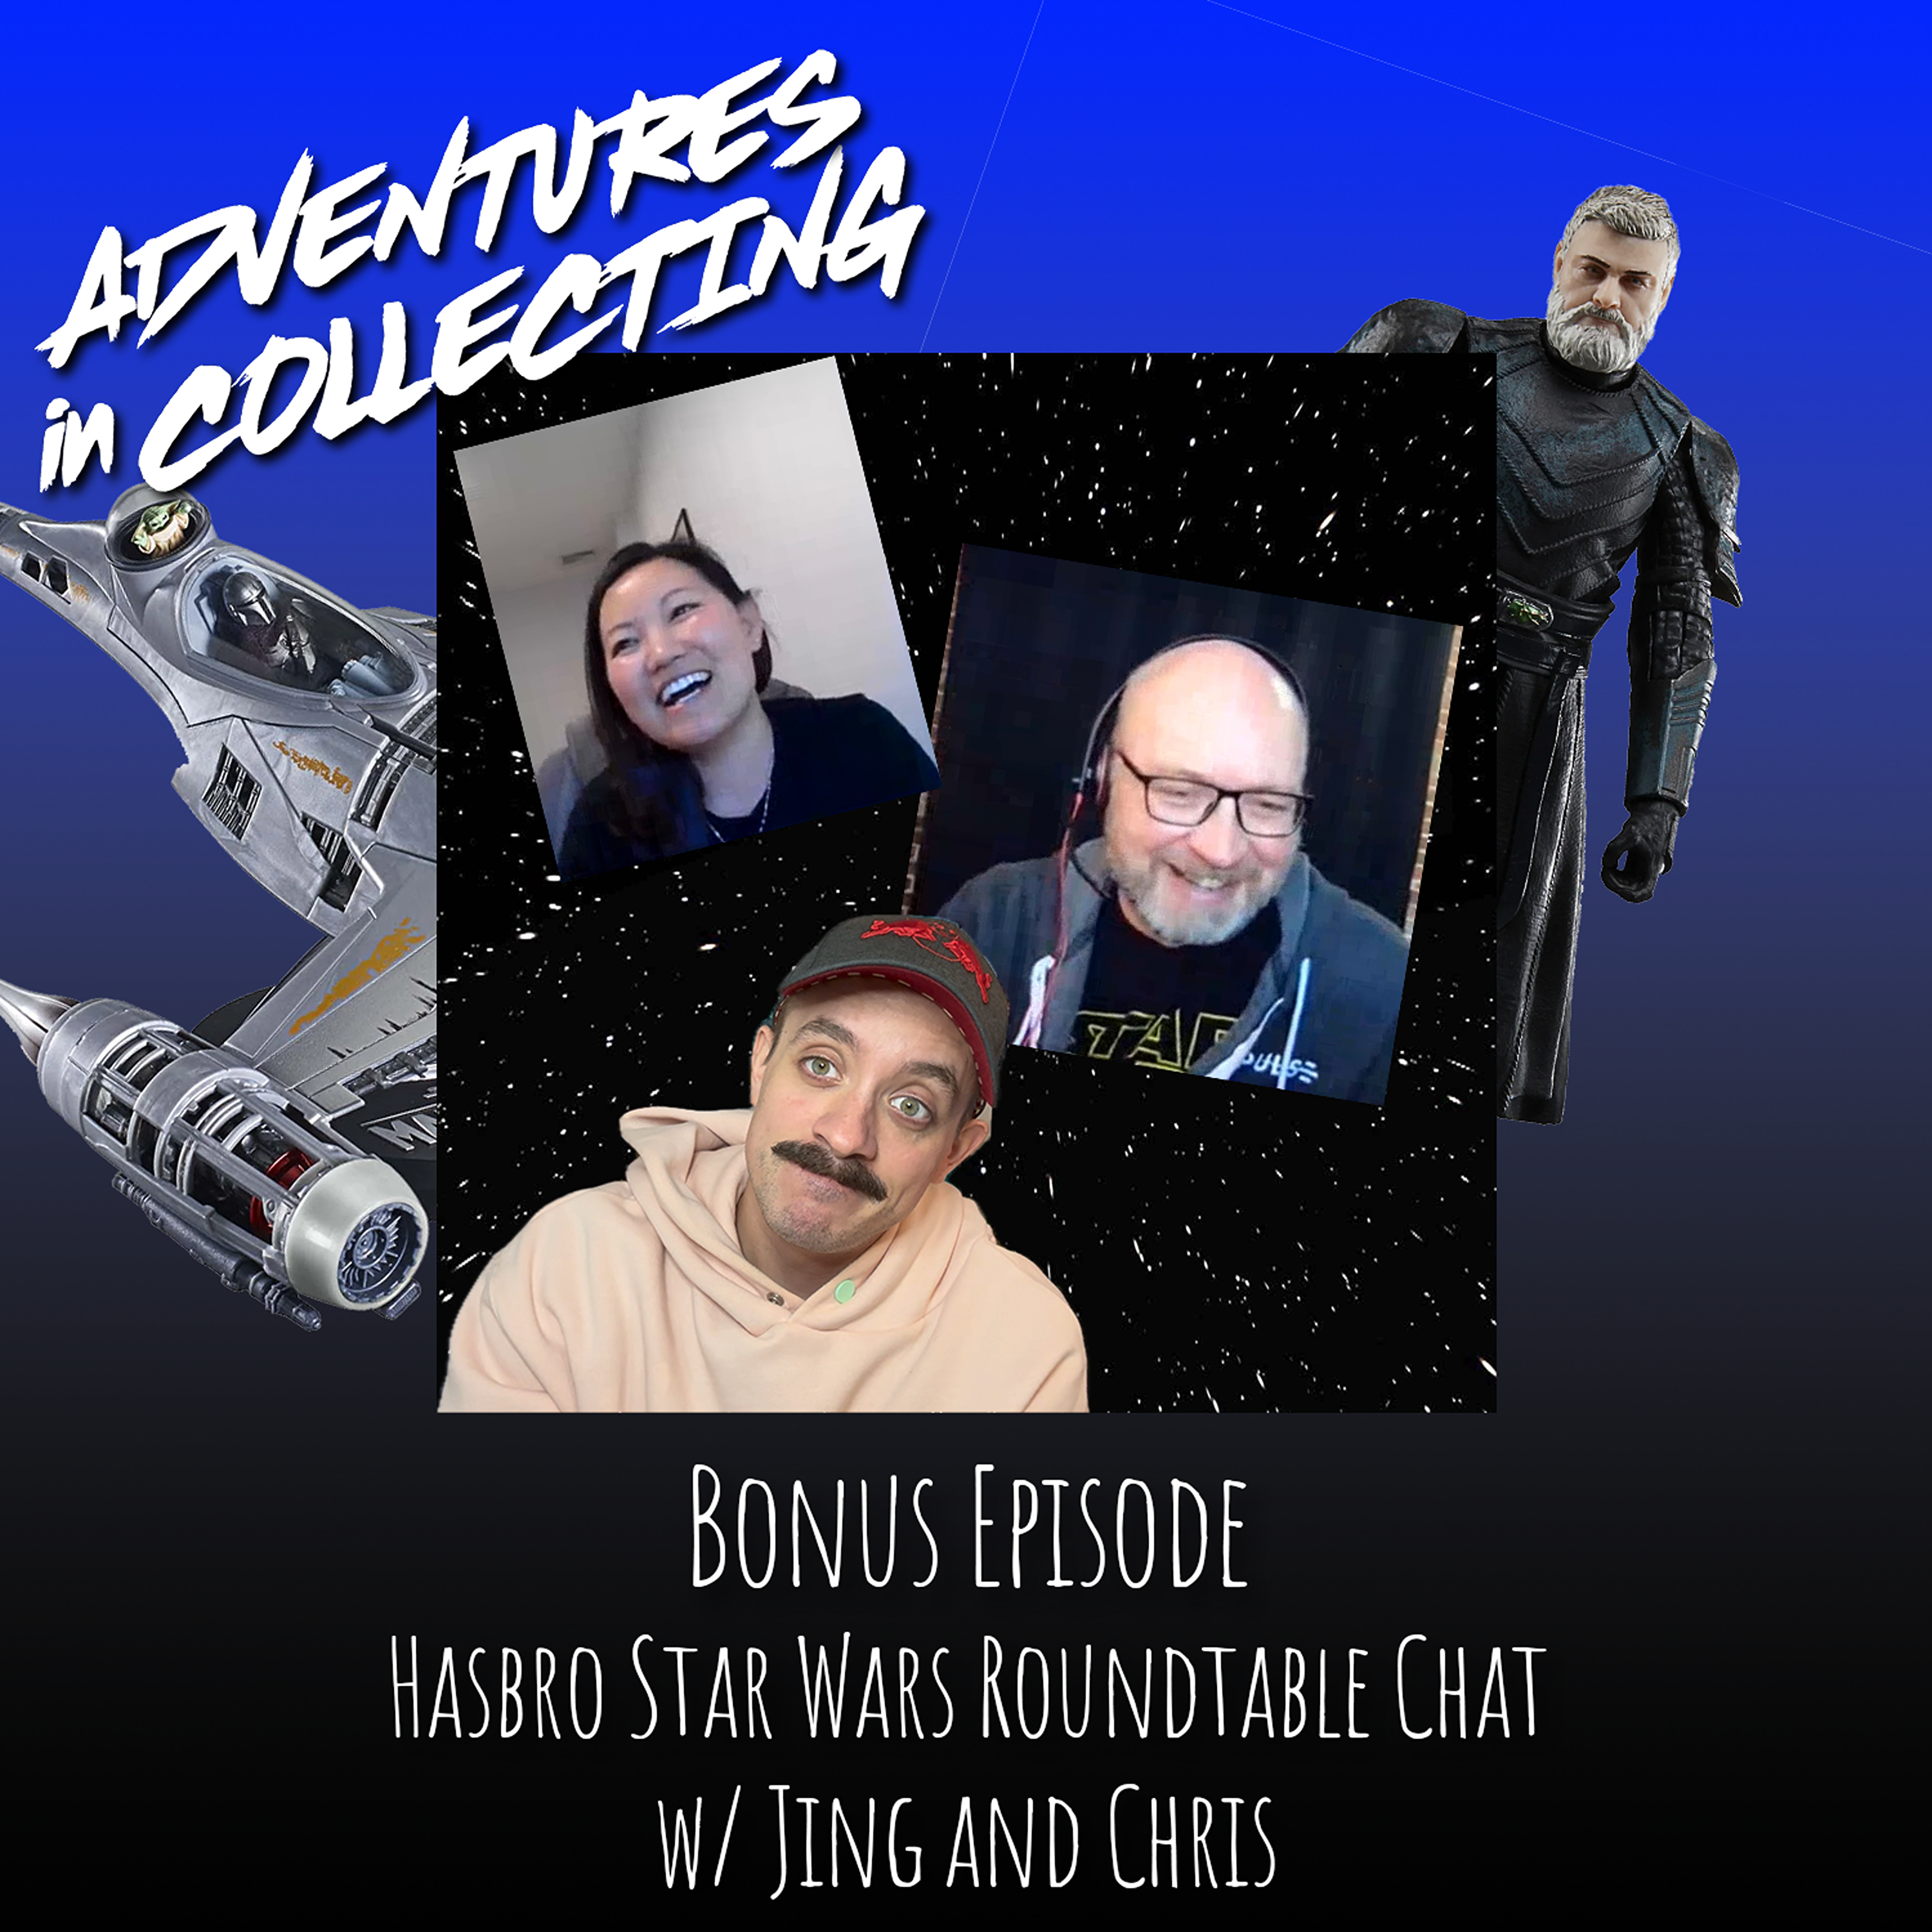 Bonus Episode: A Roundtable Discussion with Jing and Chris of the Hasbro Star Wars Team